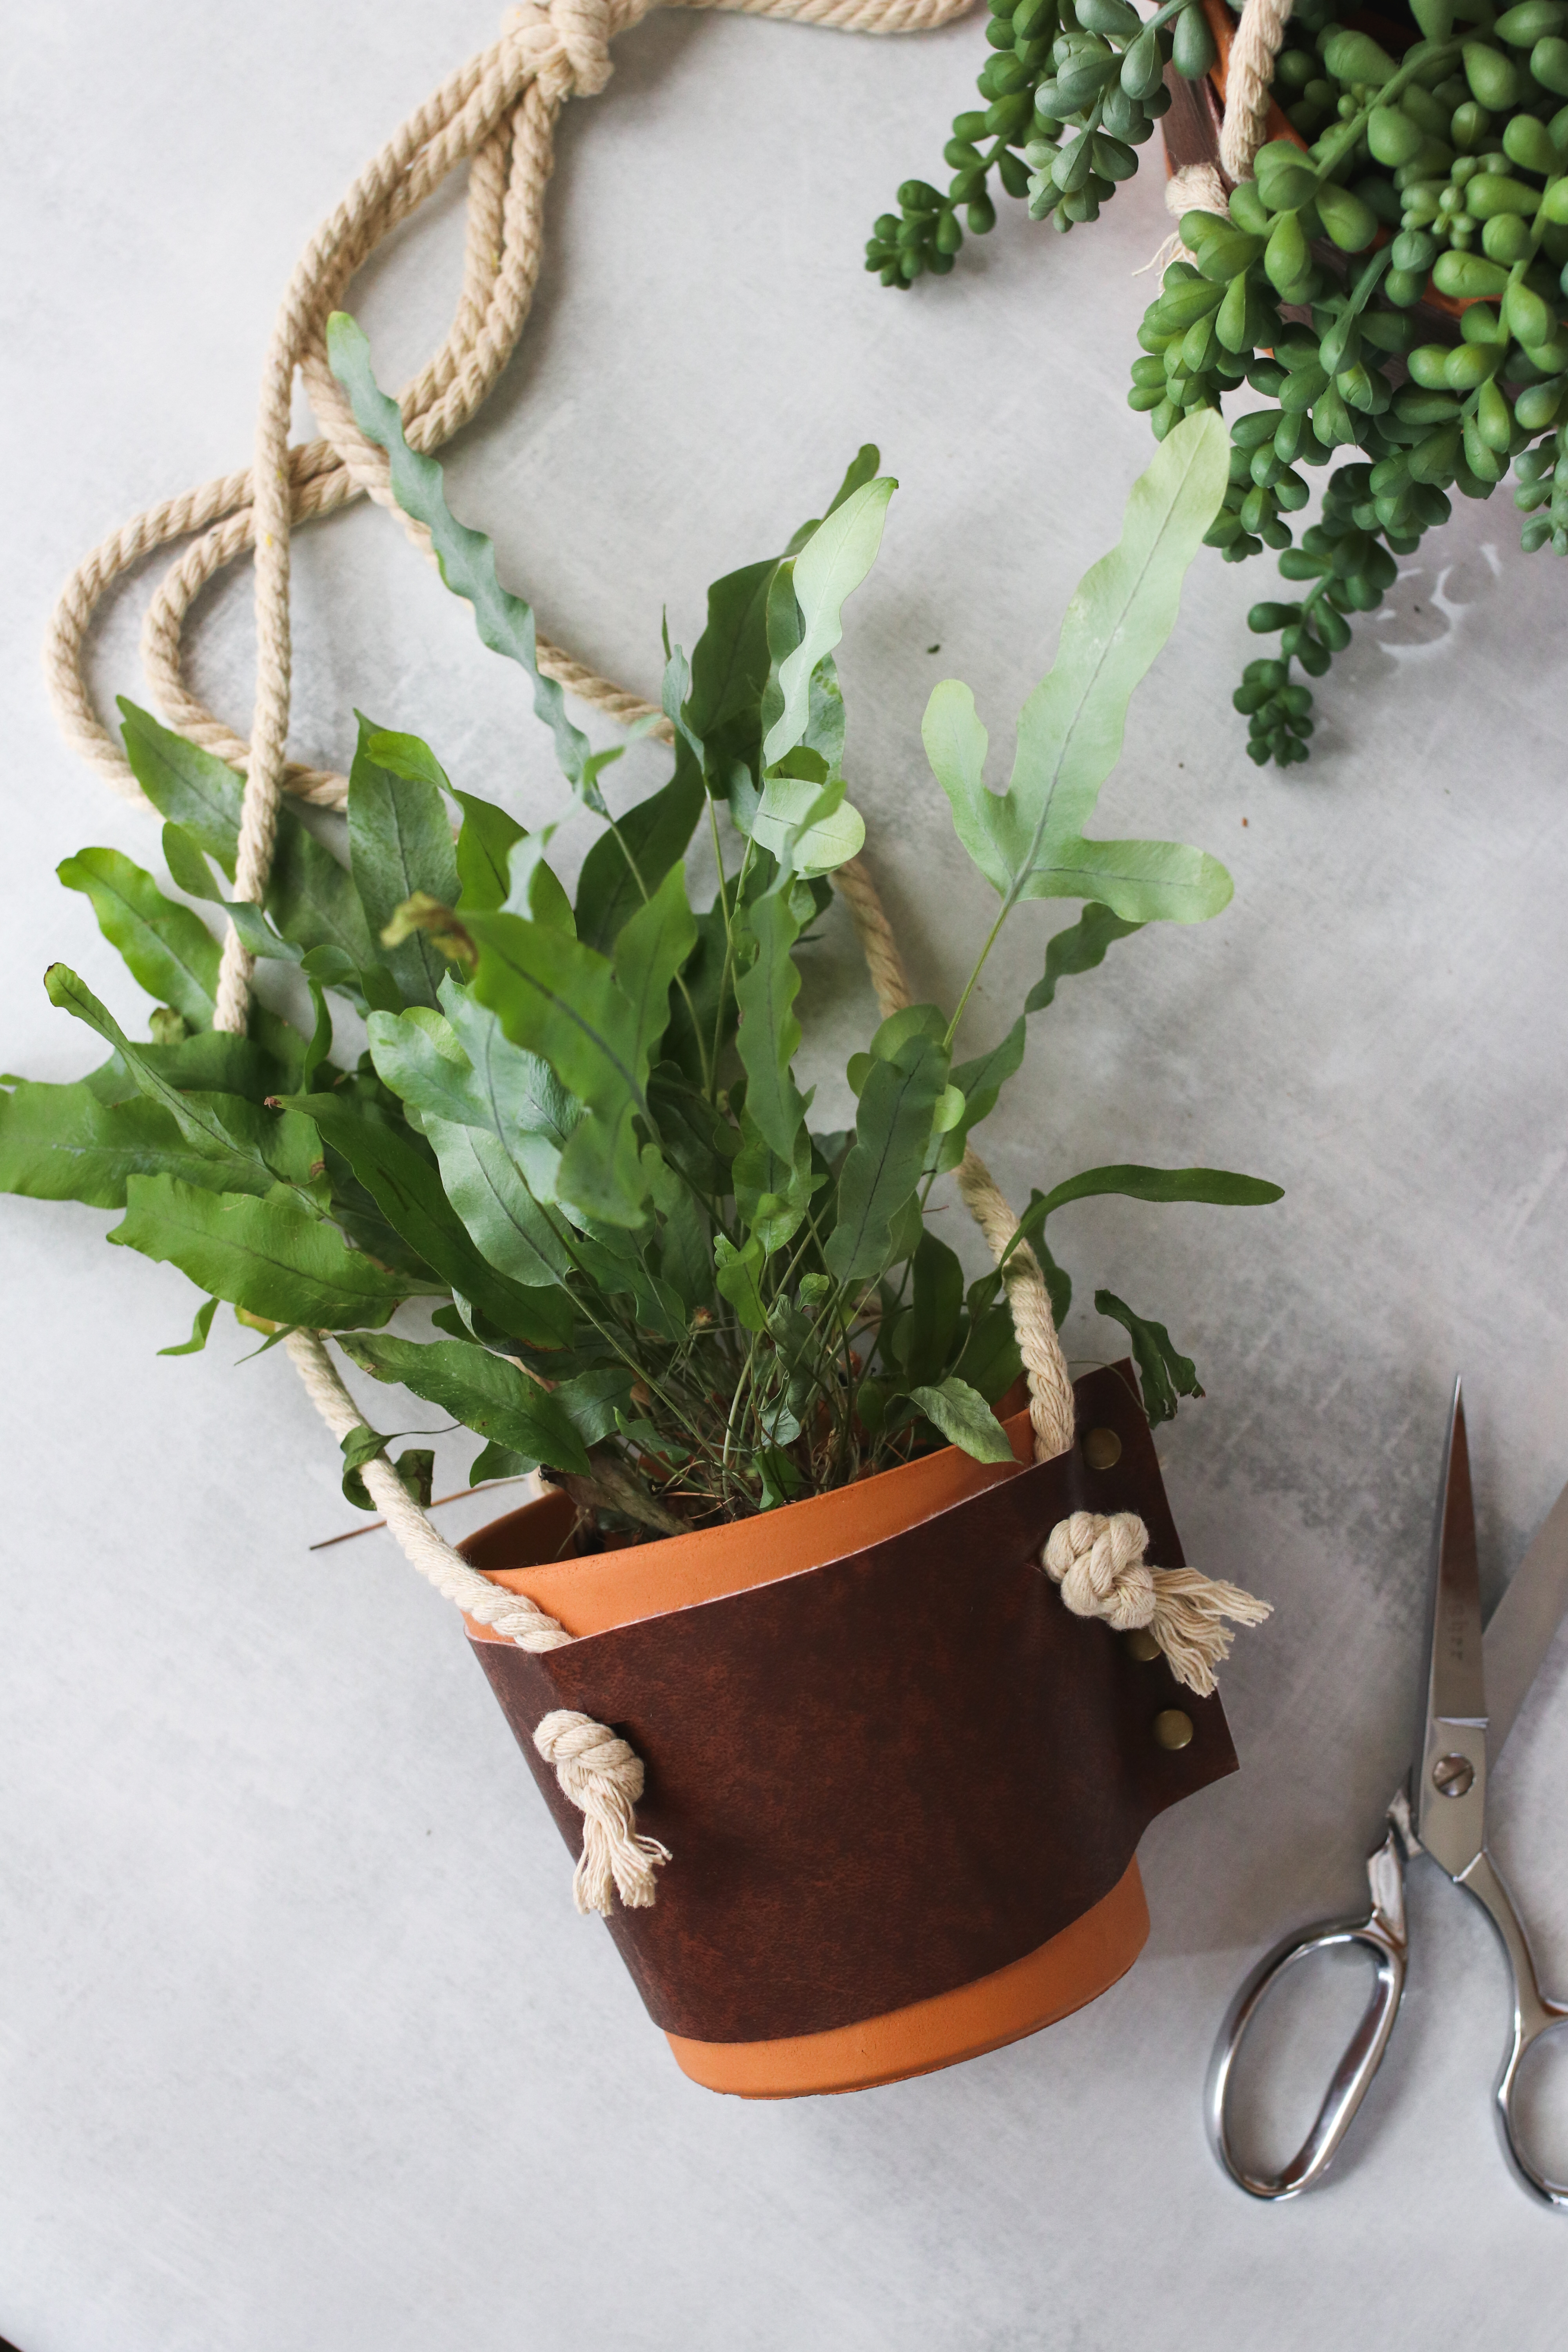 How to repot your house plants without killing them